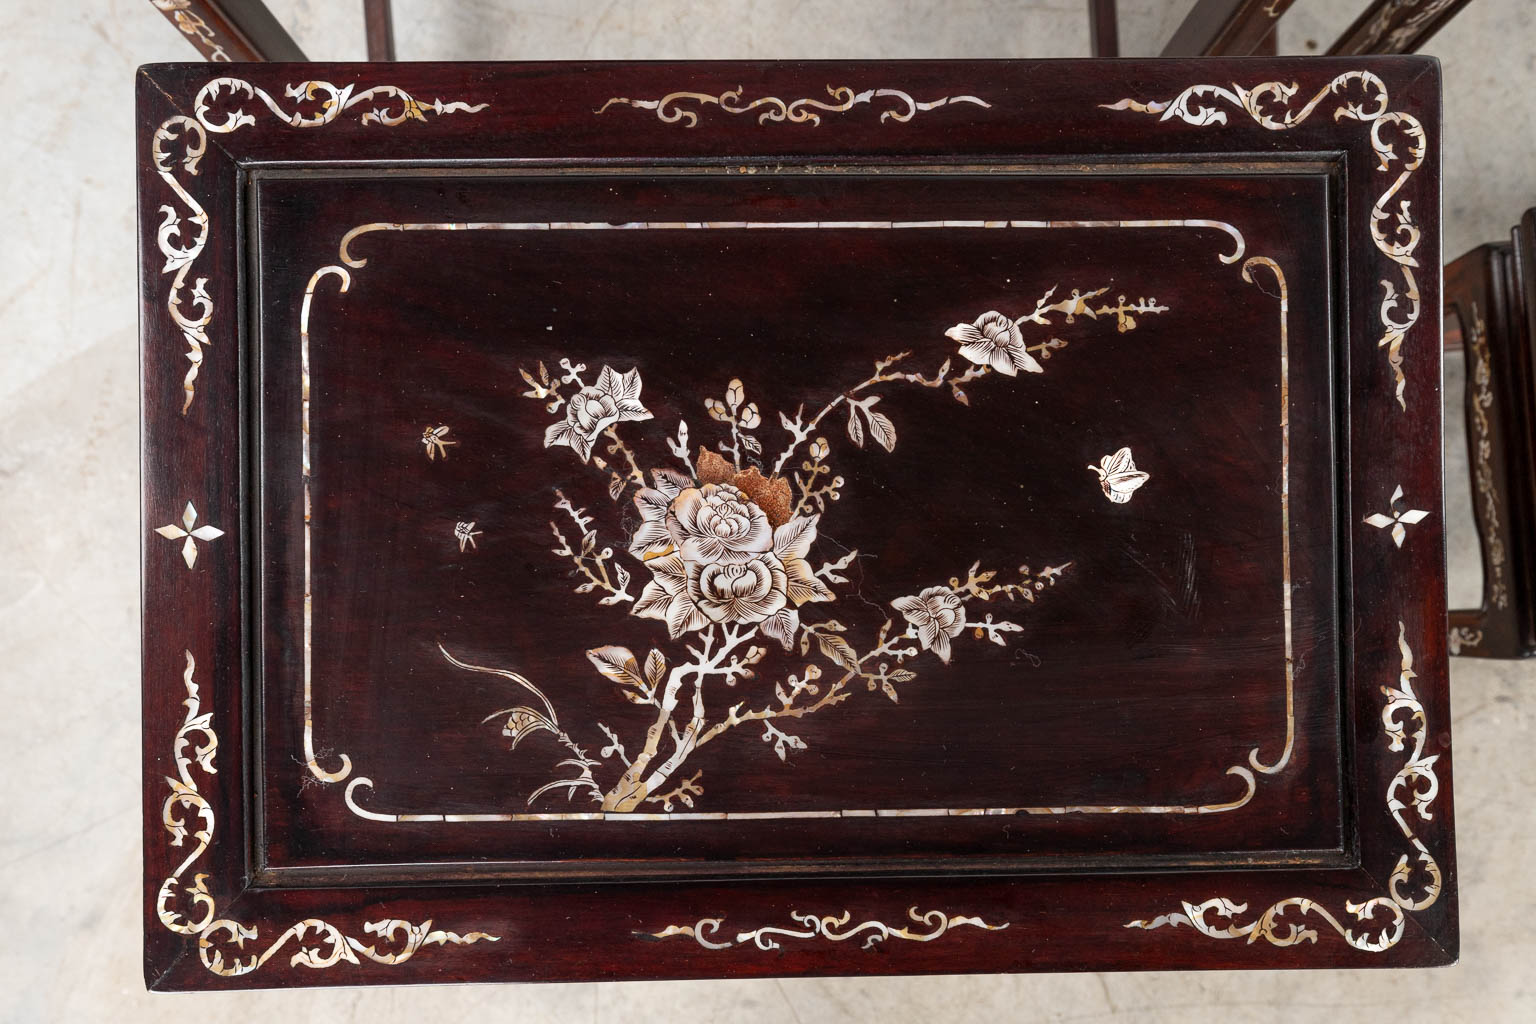 A collection of 4 cigogne side tables with mother of pearl inlay in Oriental style. (H:66cm)